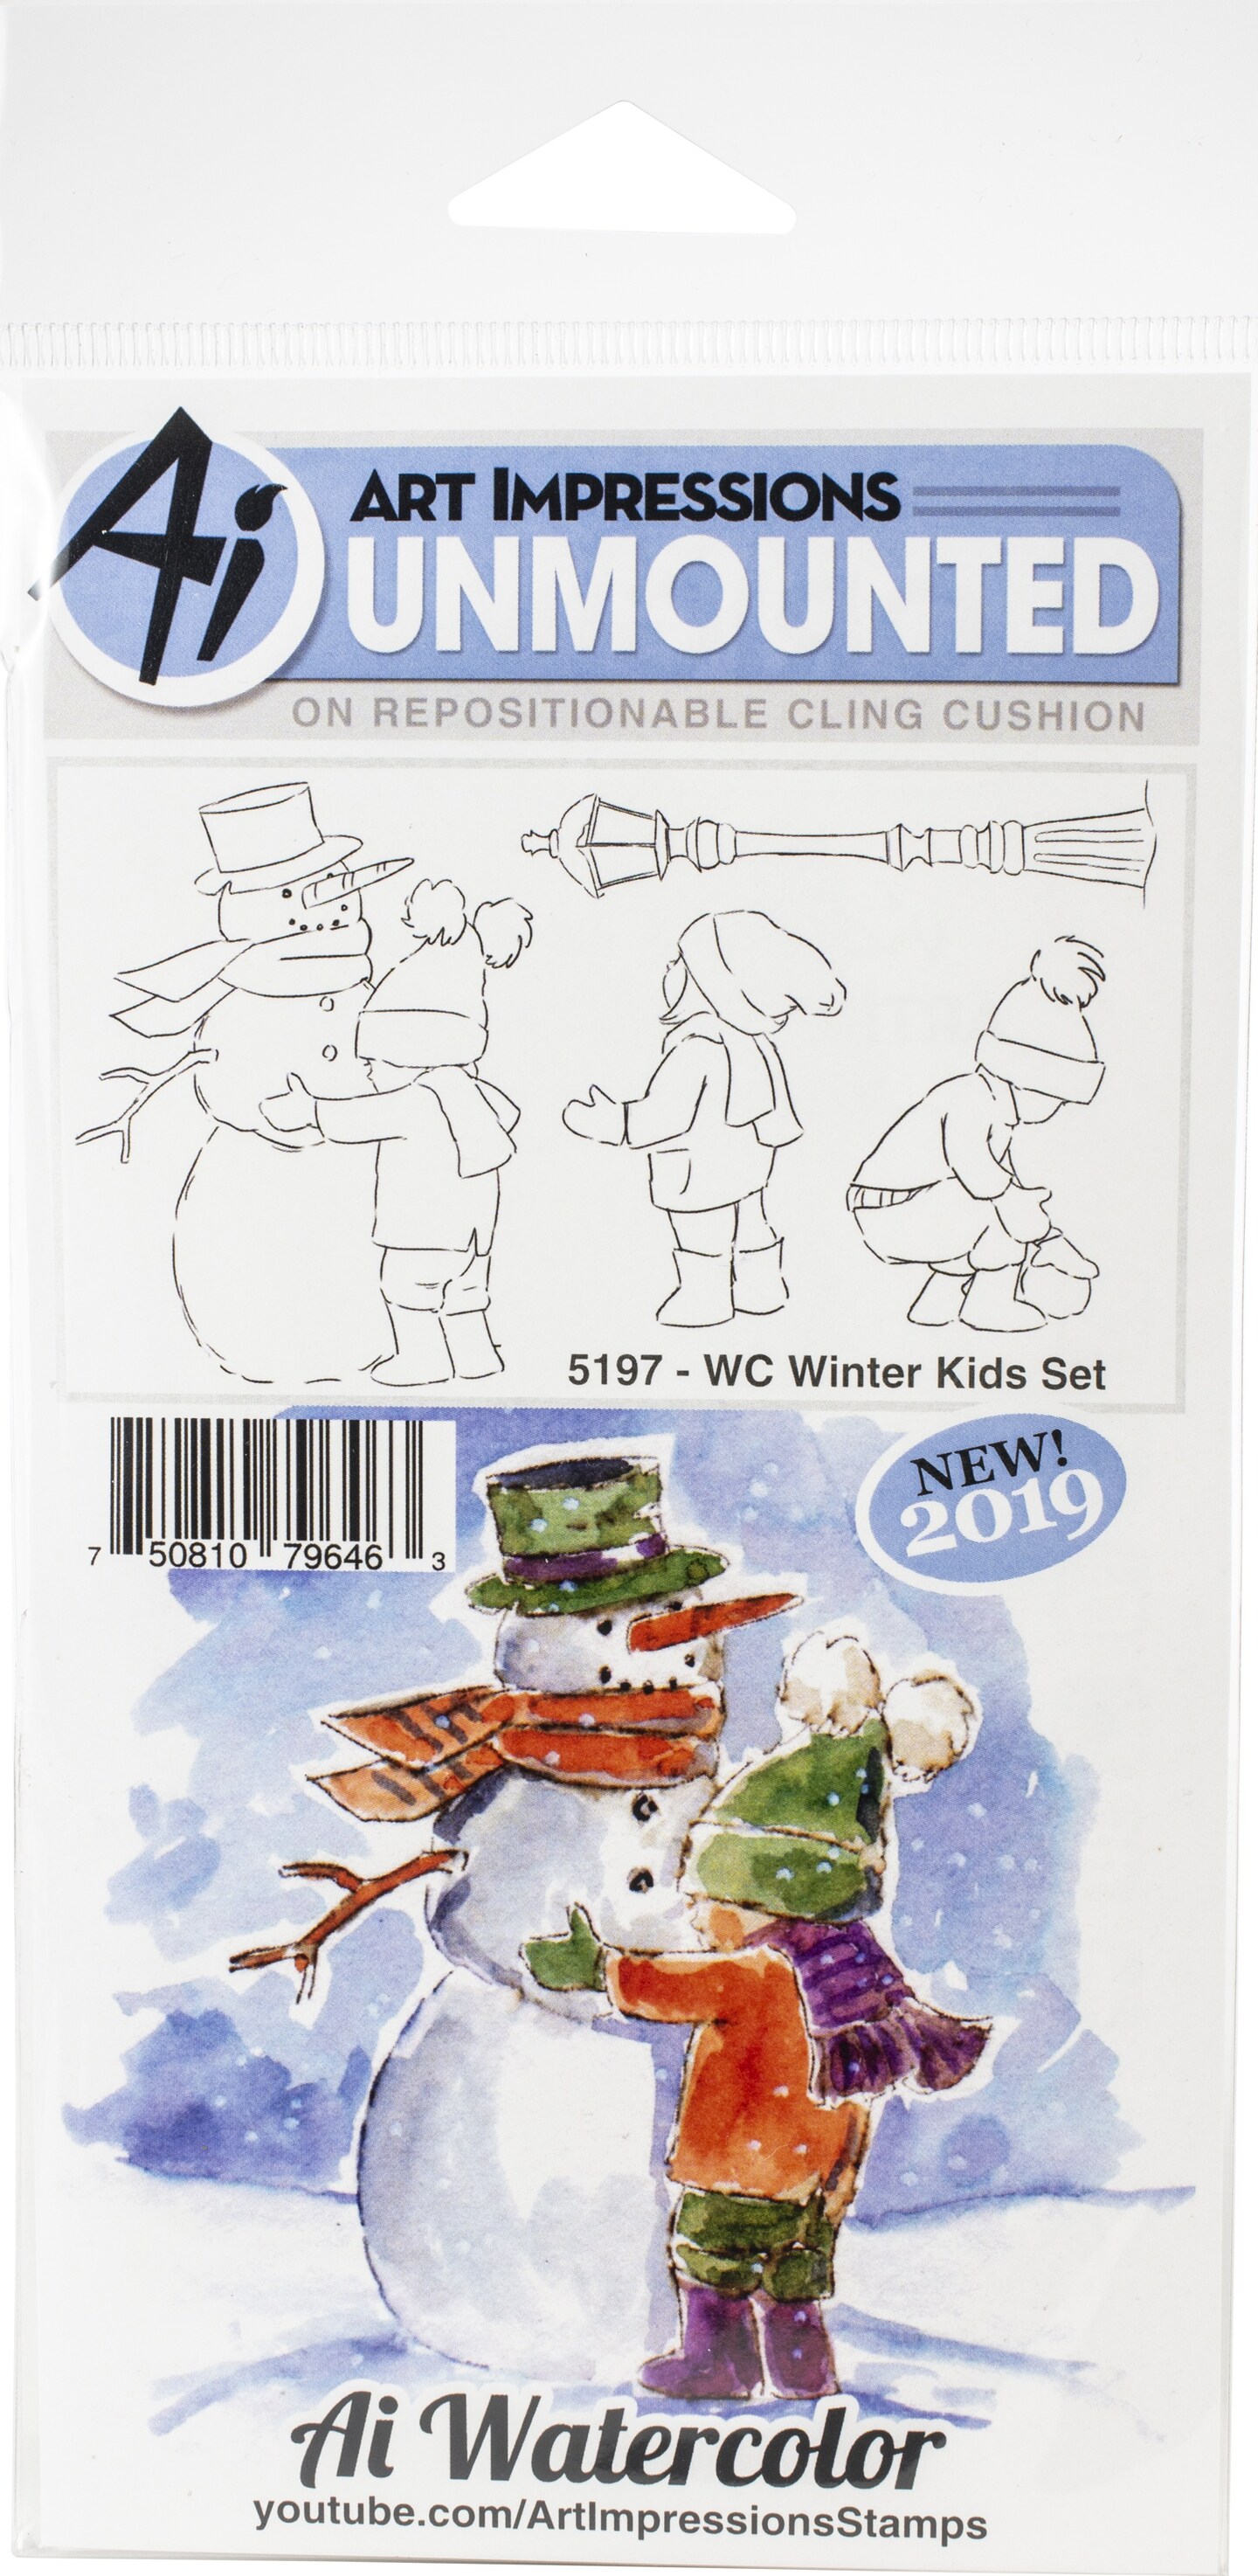 Art Impressions Watercolor Cling Rubber Stamps - WC Winter Kids